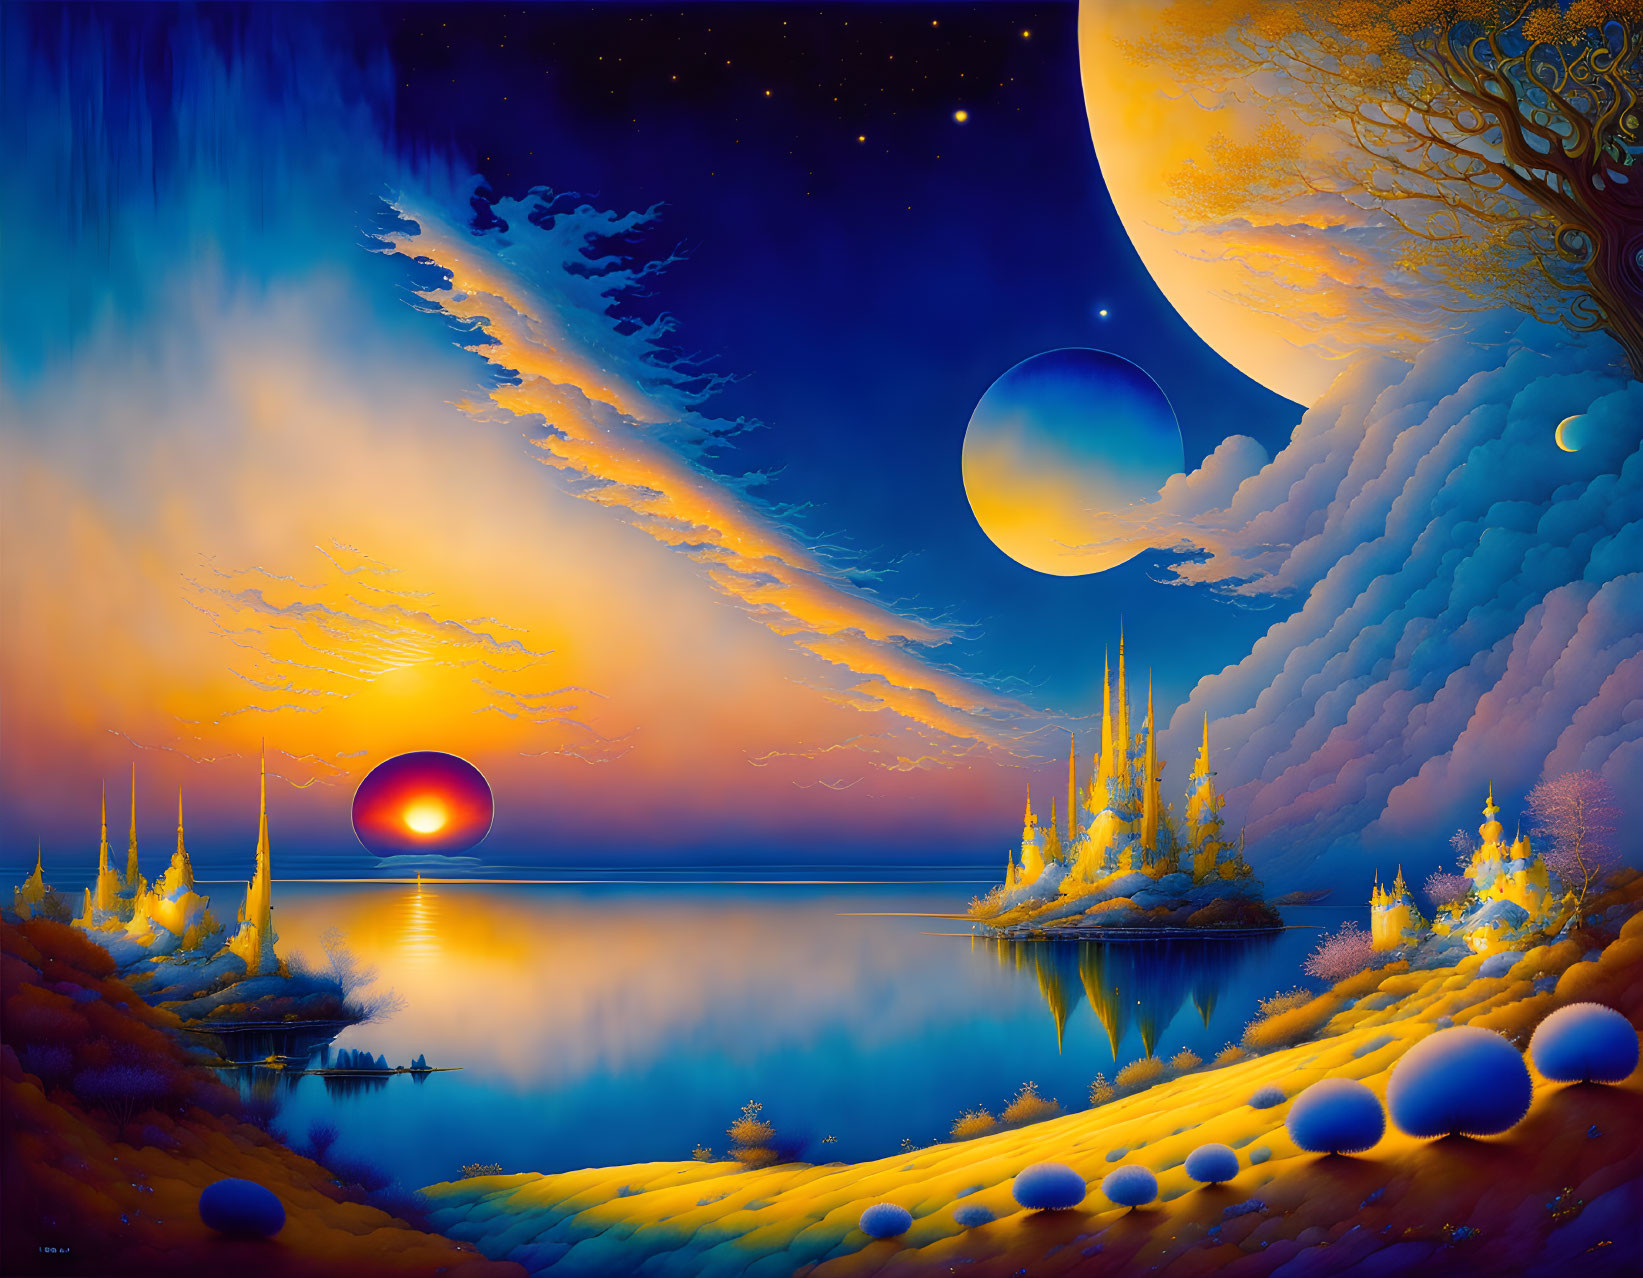 Fantasy landscape with large moon, sunset, whimsical trees, reflective water, and otherworldly